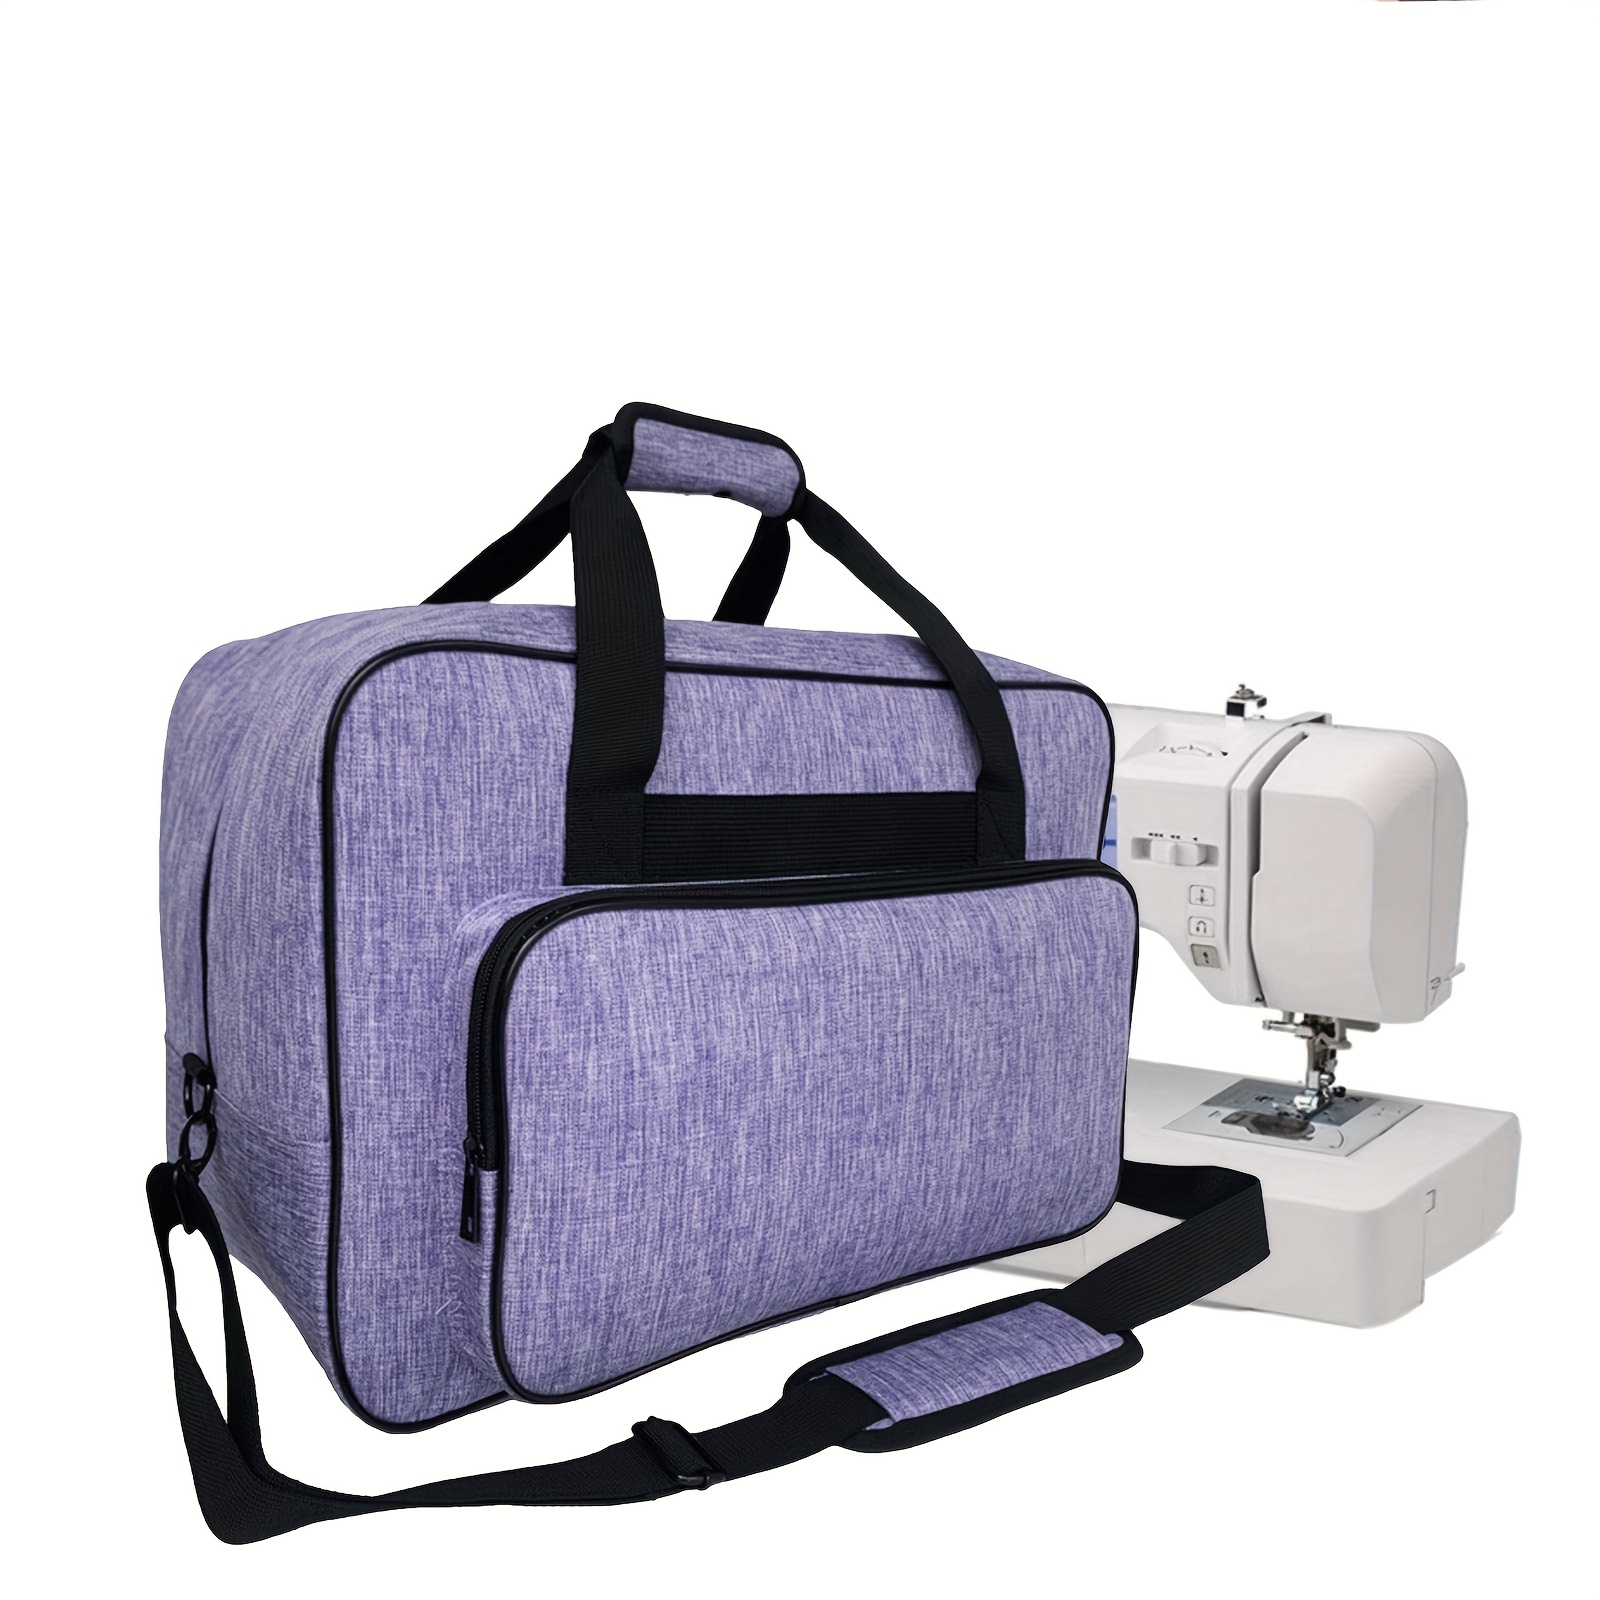 HOMEST Sewing Machine Carrying Case, Universal Tote Bag with Shoulder Strap  Comp